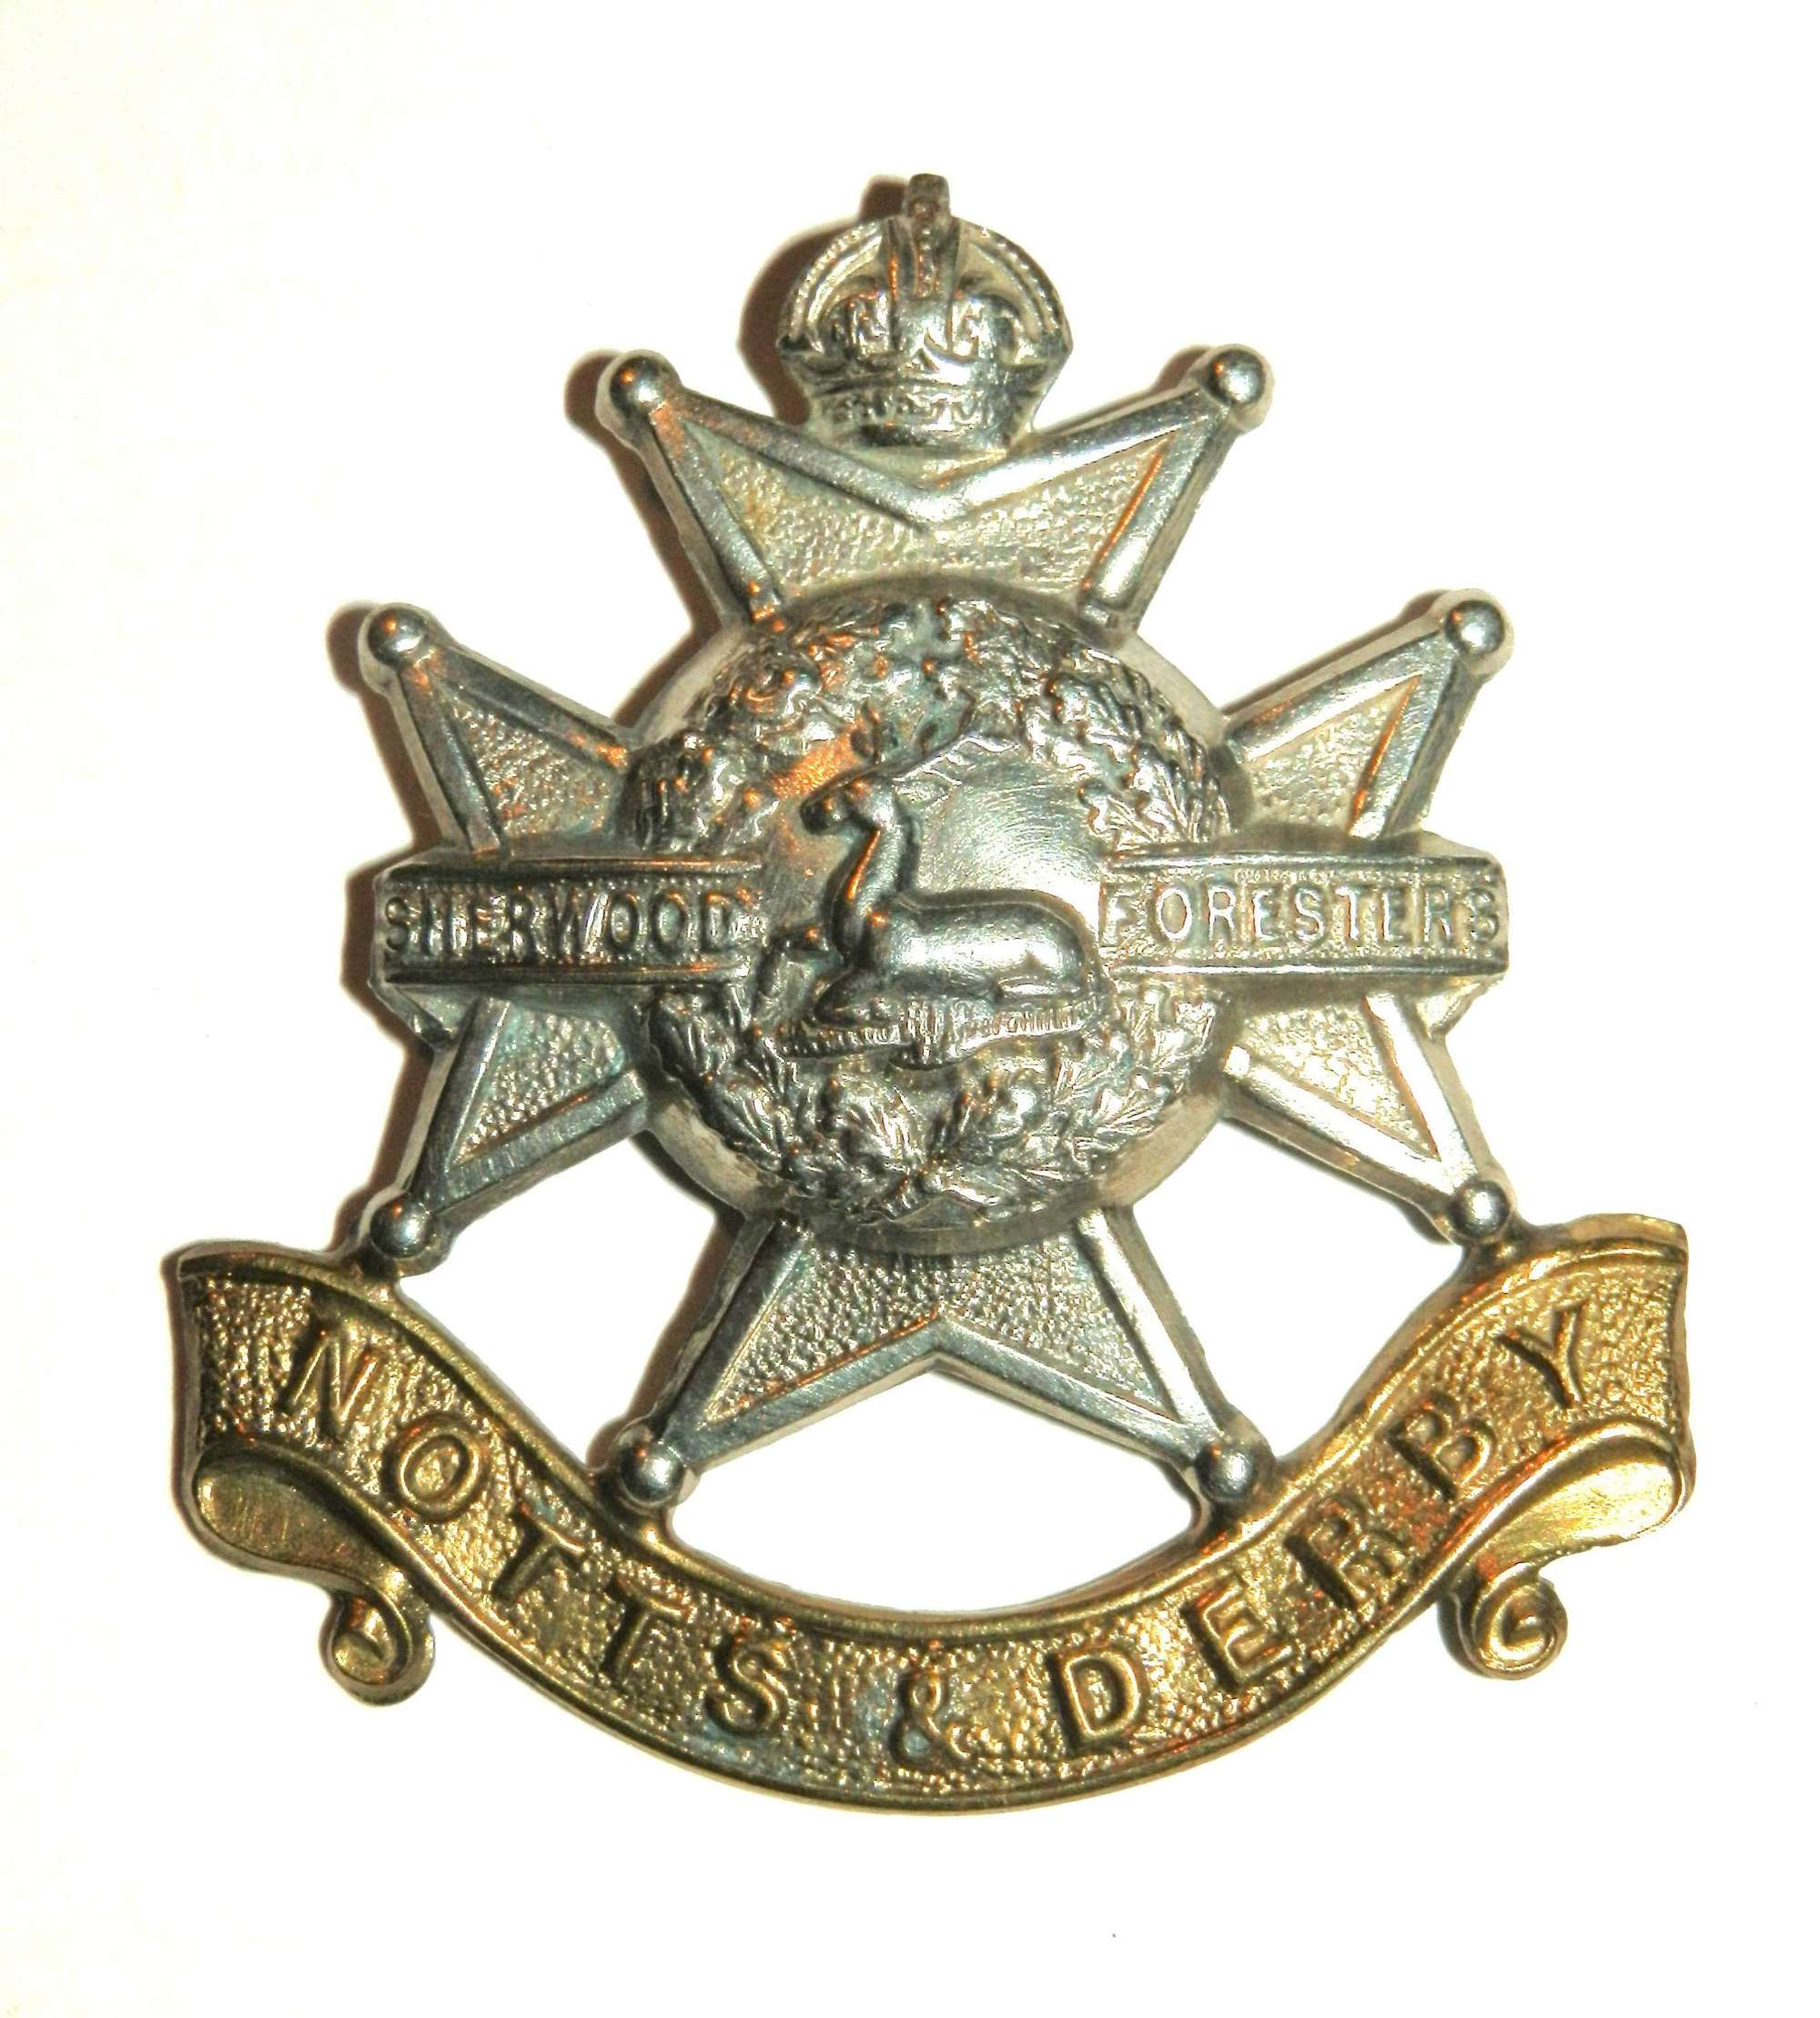 The Sherwood Foresters (Notts & Derby) Cap Badge.